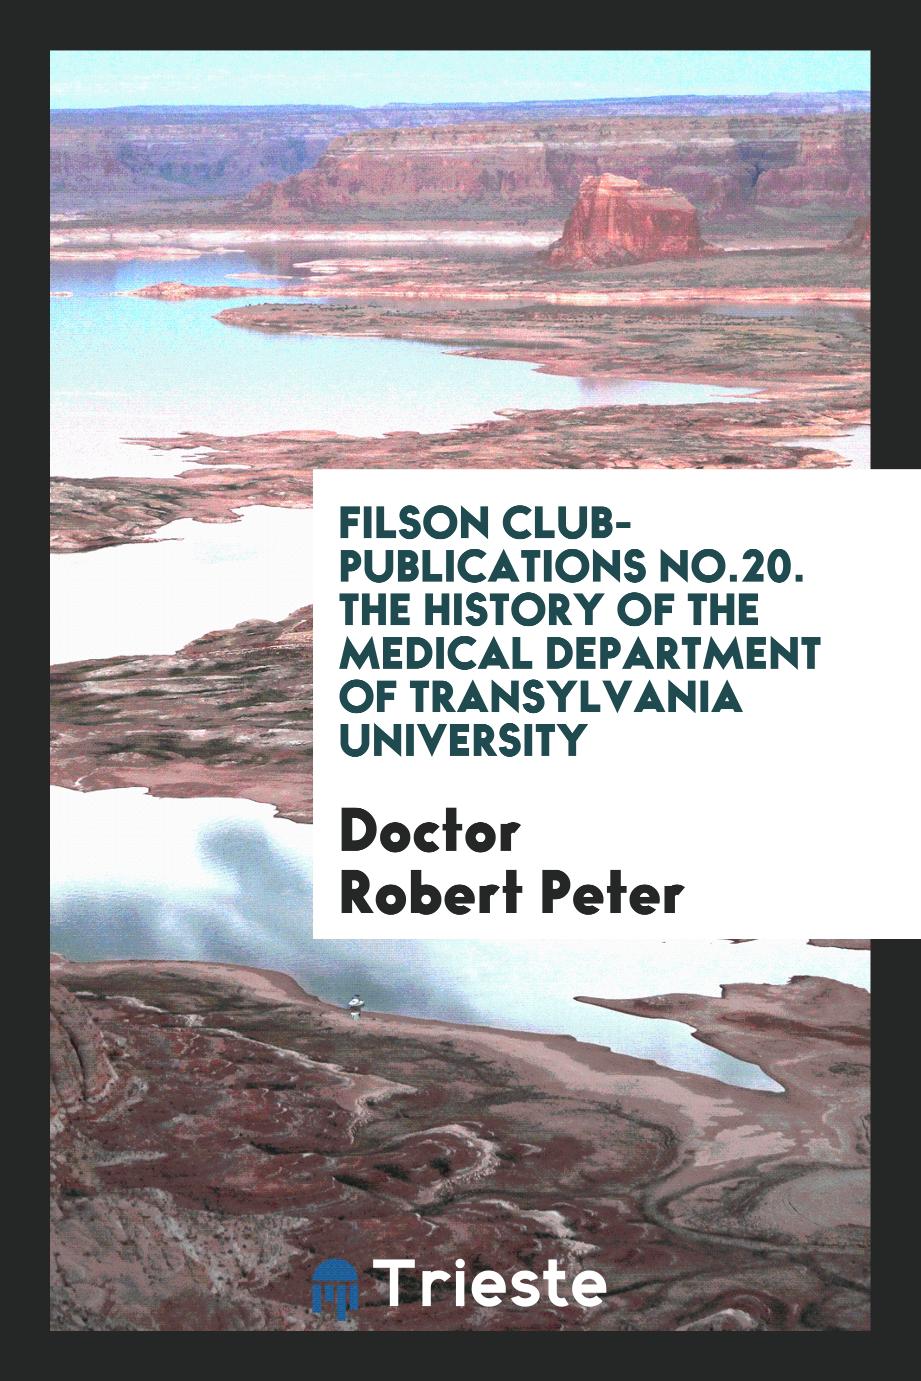 Filson club-publications No.20. The history of the medical department of Transylvania University